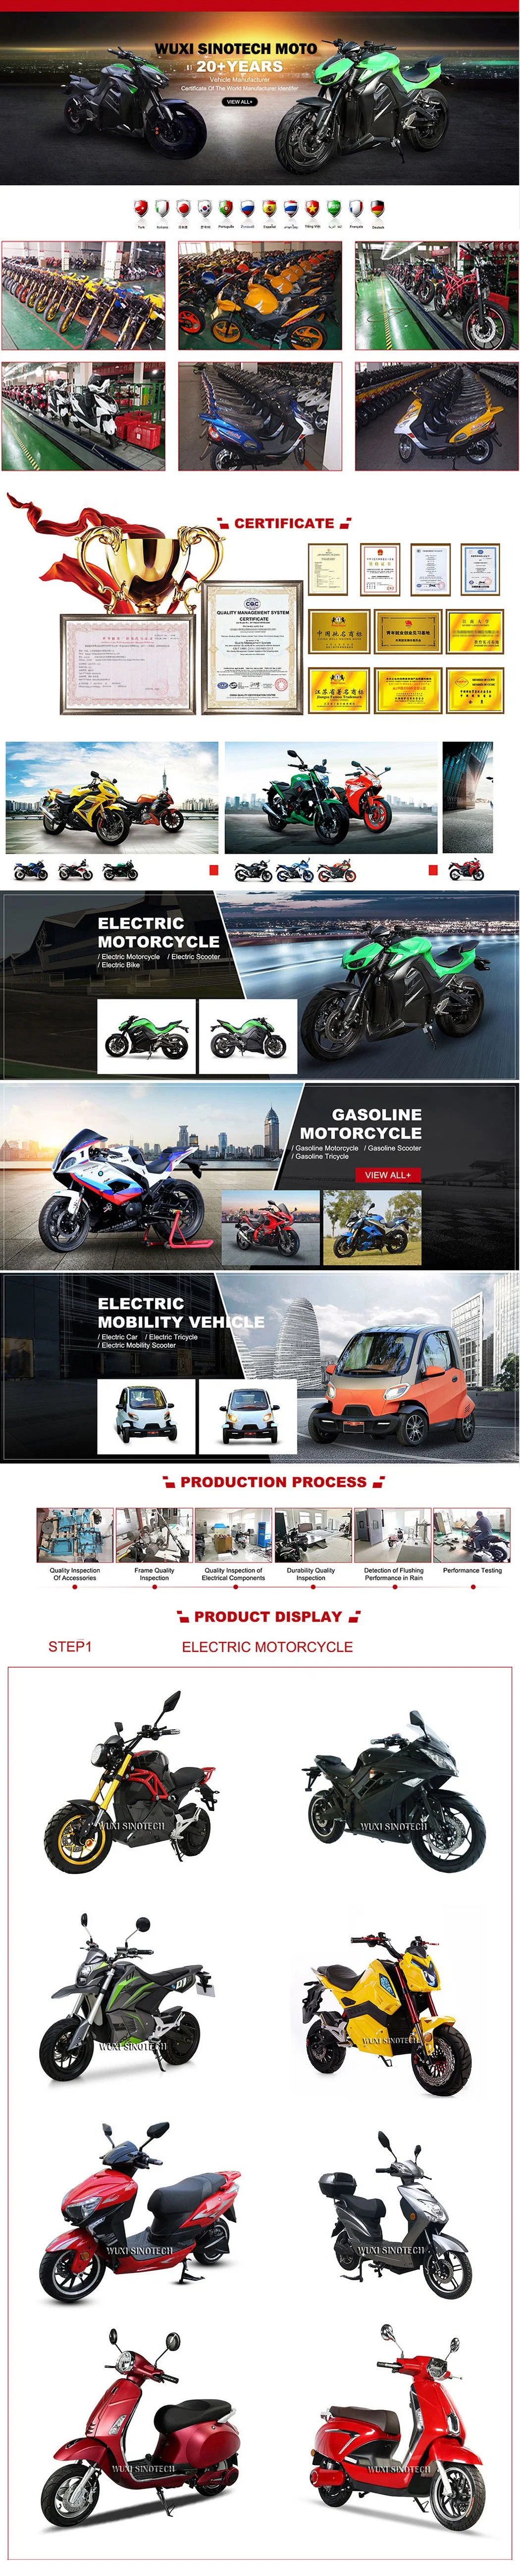 1000W/ 1500W Cheap High Quality Hot-Sale Delivery Models Electric Motorcycle Scooter 3 Wheeler City Cocowith Disc Brakes 45-65km/H Long Endurance